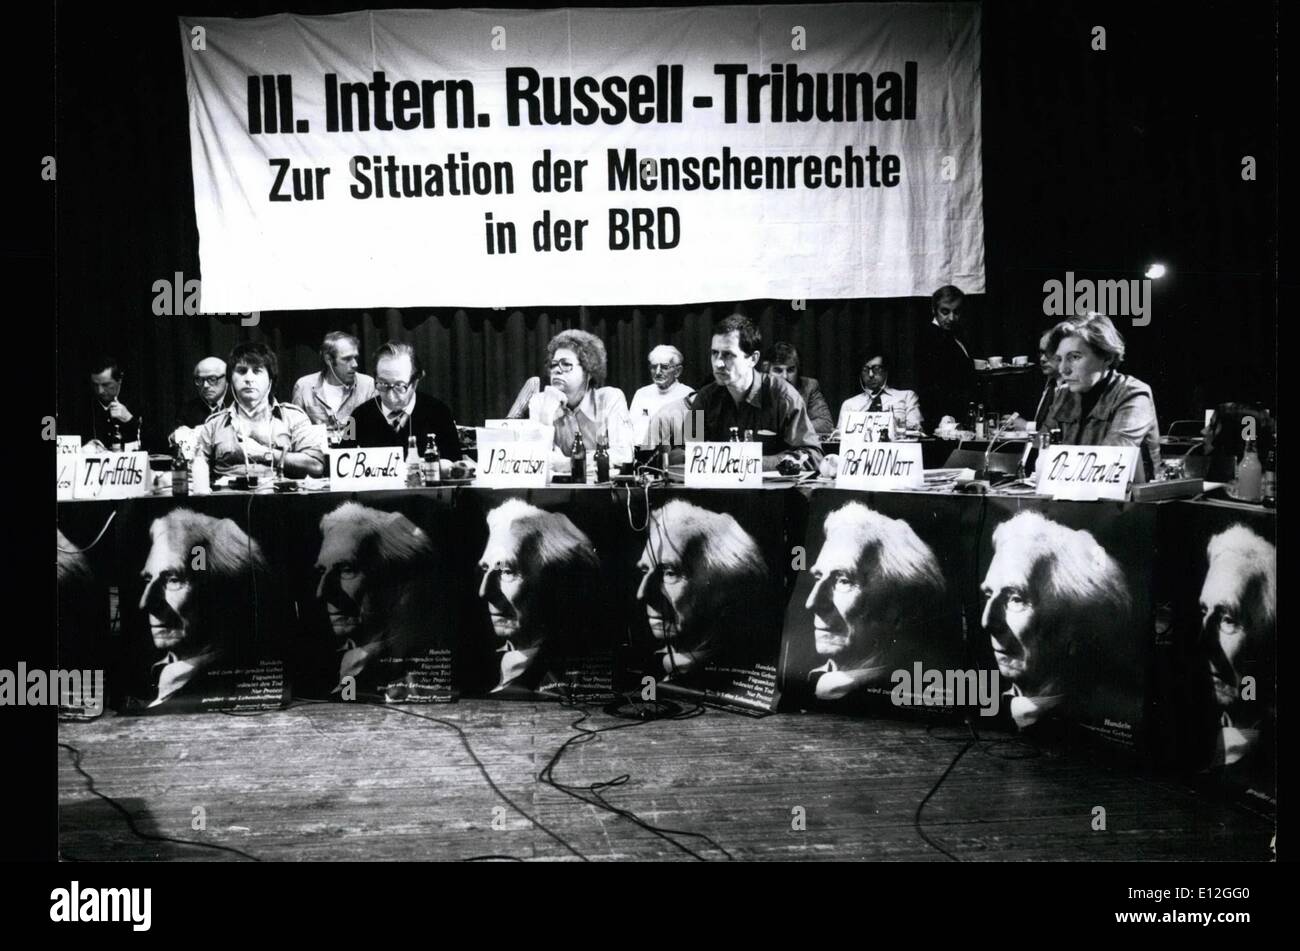 Jan. 10, 2012 - The Russell tribunal Confered in Franefurt/.Main - Some days ago there took place the 3. Internations Russell Tribunel in Frankfurt/Main. The 28 members discussed, if in the Federal Republic of Germany the basic and human Republic of Germnay the basic and human rights are in danger. The Chairman of the tribunal, the Yugoslavic regime-Critic Prof. Vladimir Dedijer Declared. that the tried bynal doesn't want fo defame the Federal Republic. The Russell Tribunal, which members are of many countries, is declined by the Federal Goverment, the parties and the trade-unions Stock Photo